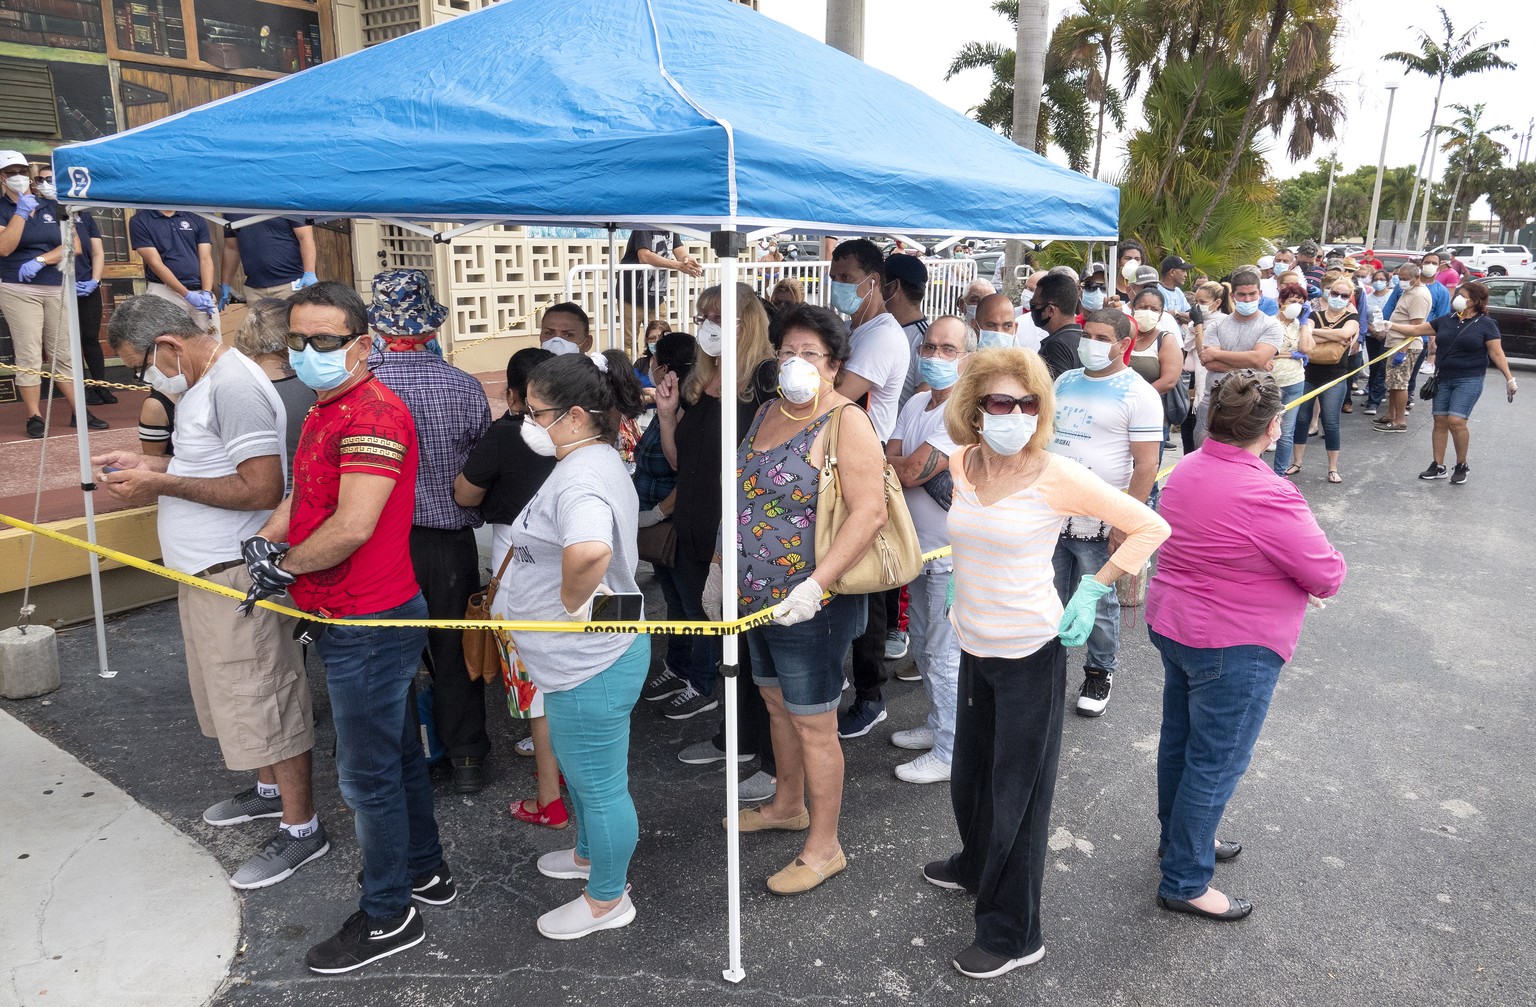 epa08348692 People queue to receive the printed Unemployment Benefits applications in the parking lot of Kennedy Library in Hialeah, Florida, USA, 07 April 2020. Hundreds of residents lined up hours b ...